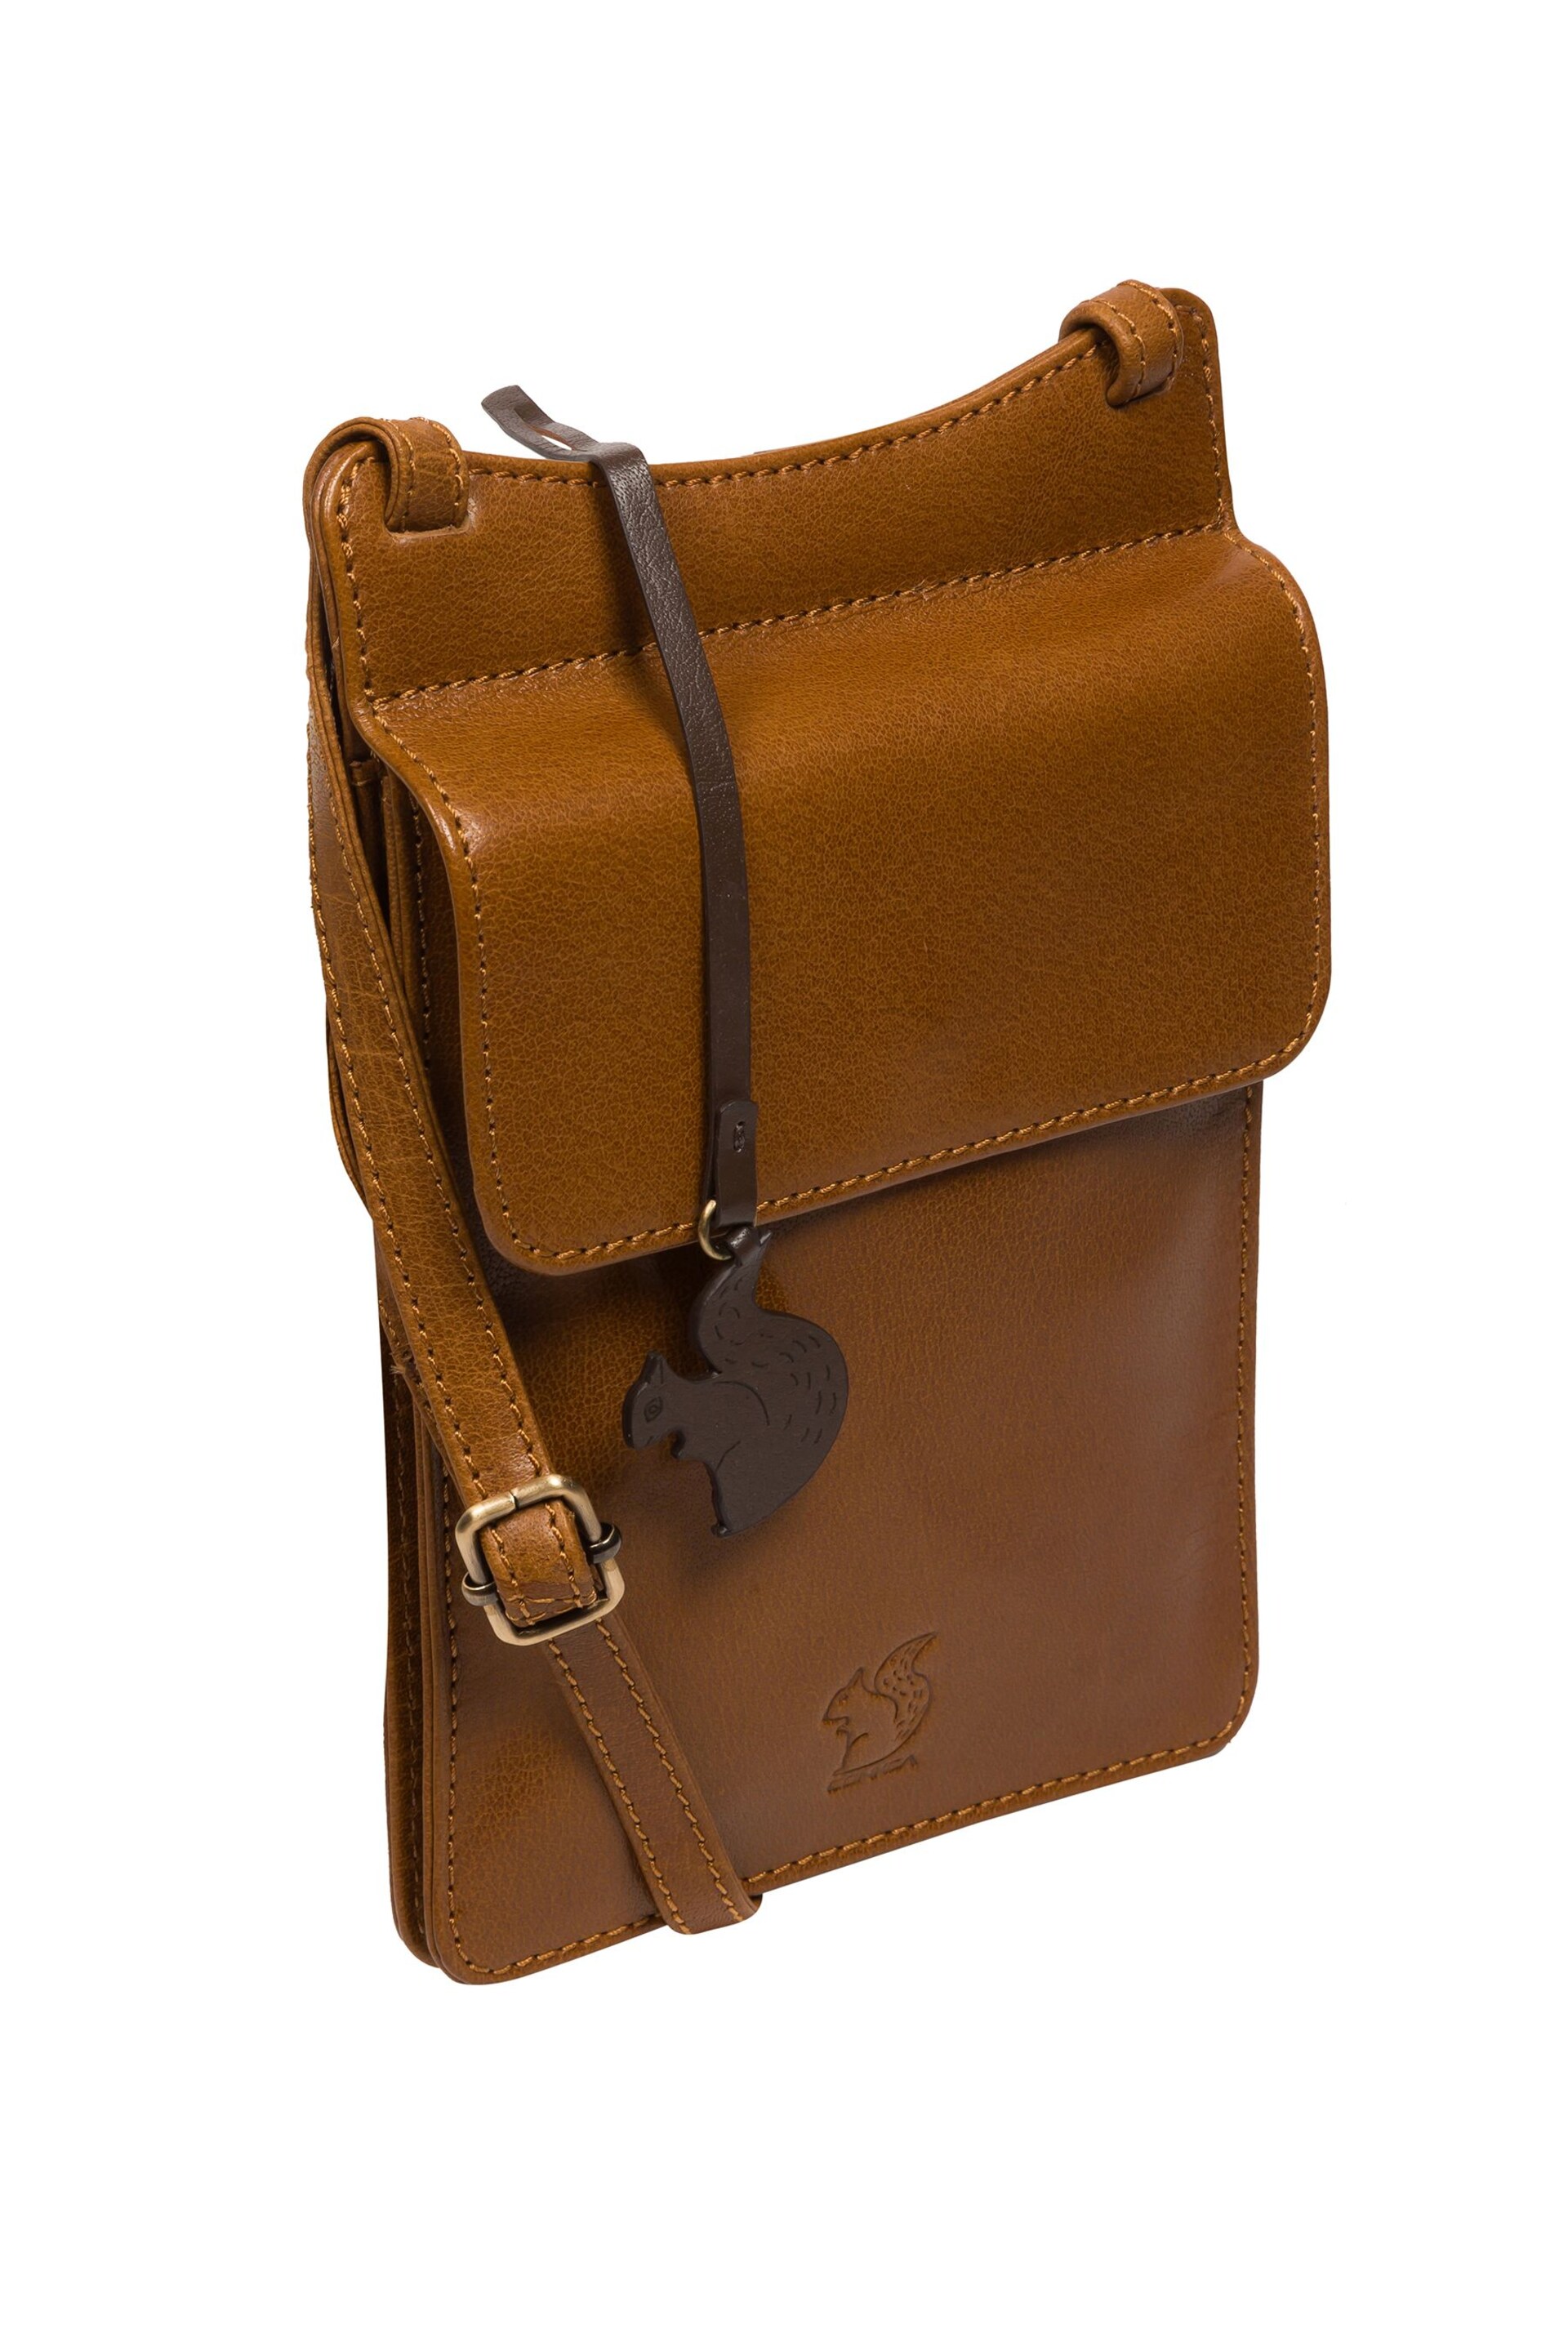 Conkca 'Milly' Leather Cross-Body Phone Black Bag - Image 4 of 6